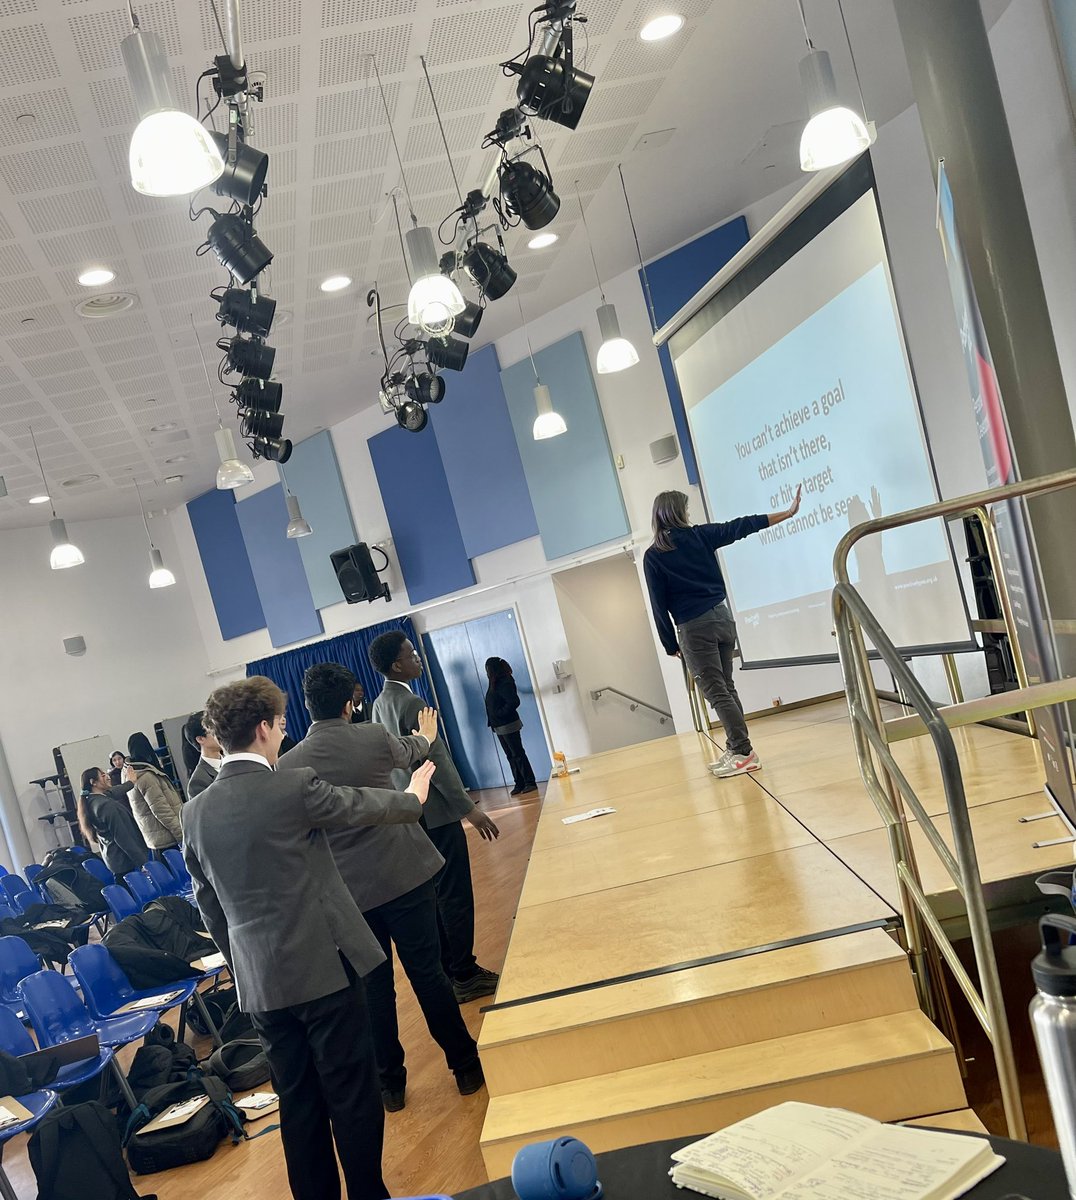 A fantastic ‘Goal Setting’ workshop with Year 11s today led by the fab Natalie @_positivelyou We thought about our goals, aspirations and steps to be successful, as well as some BIG picture thinking! 👏🏻